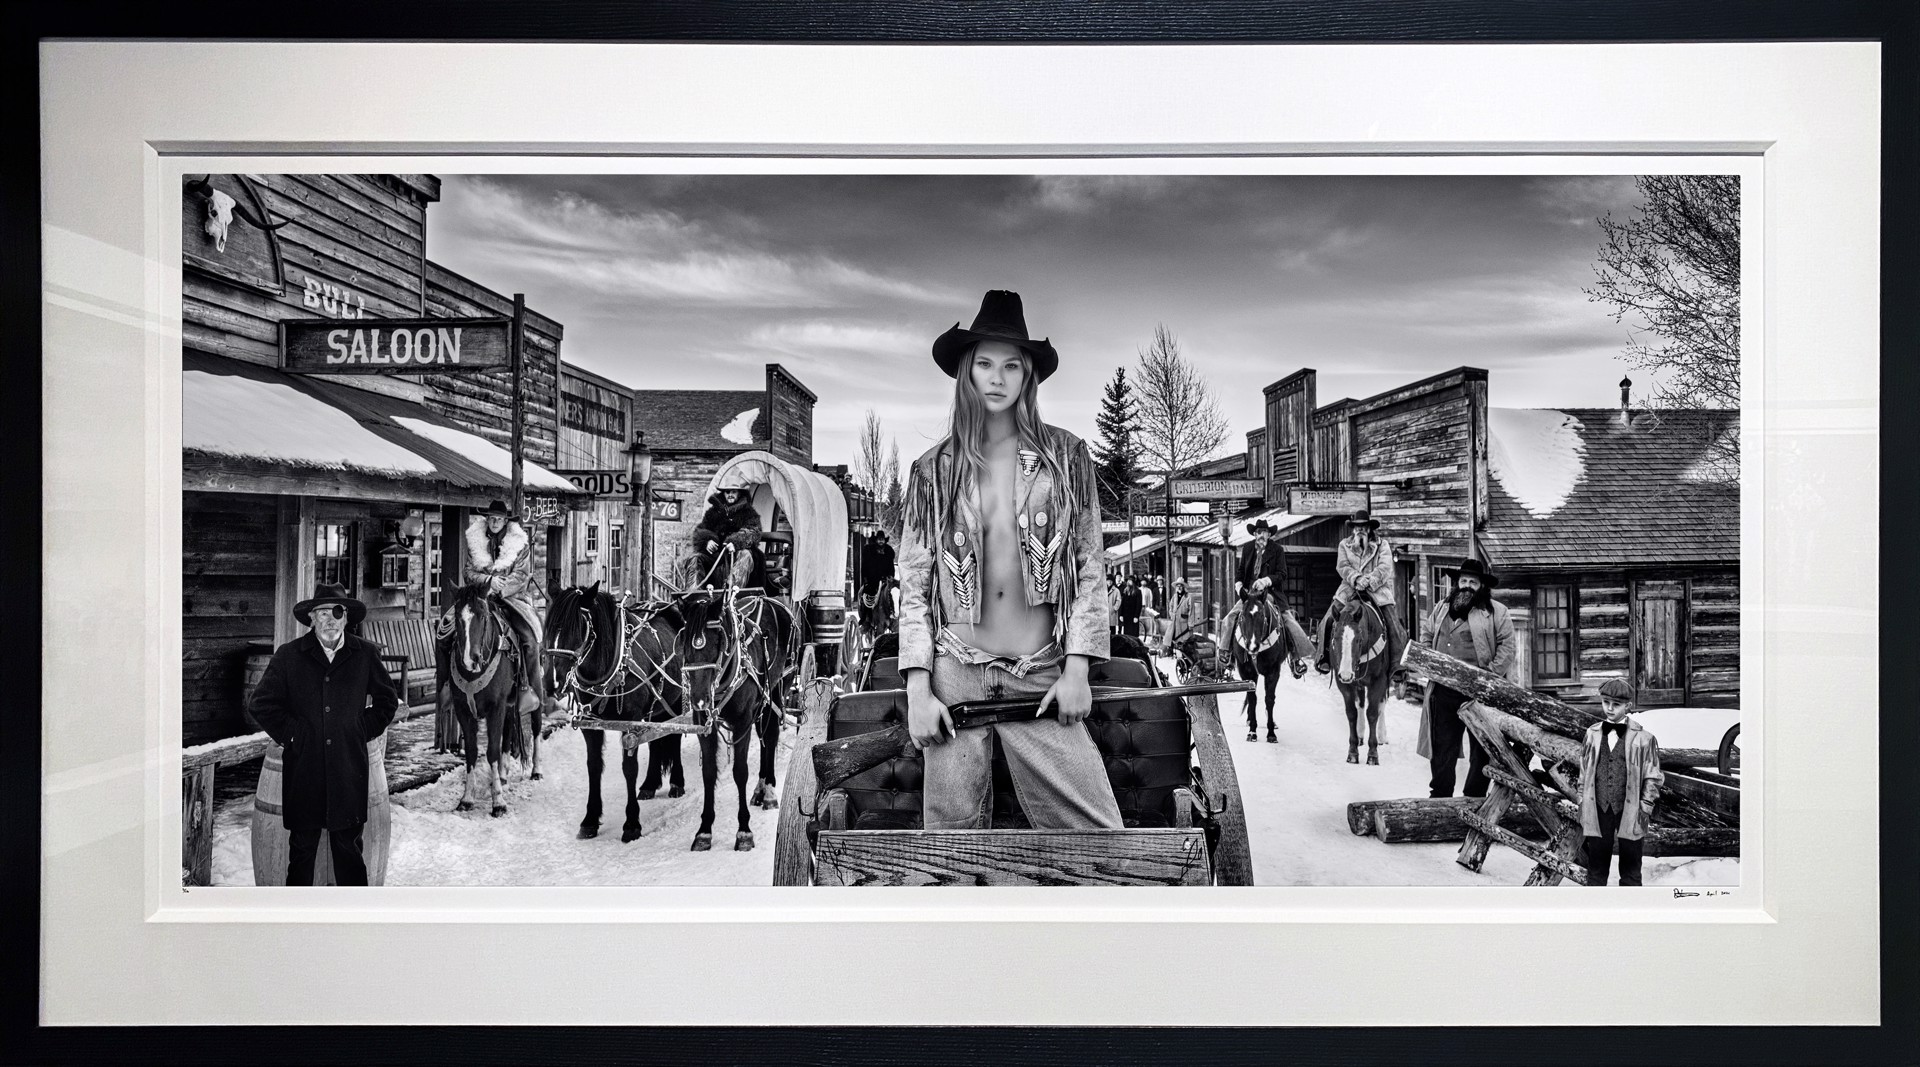 The Sheriff's Daughter by David Yarrow